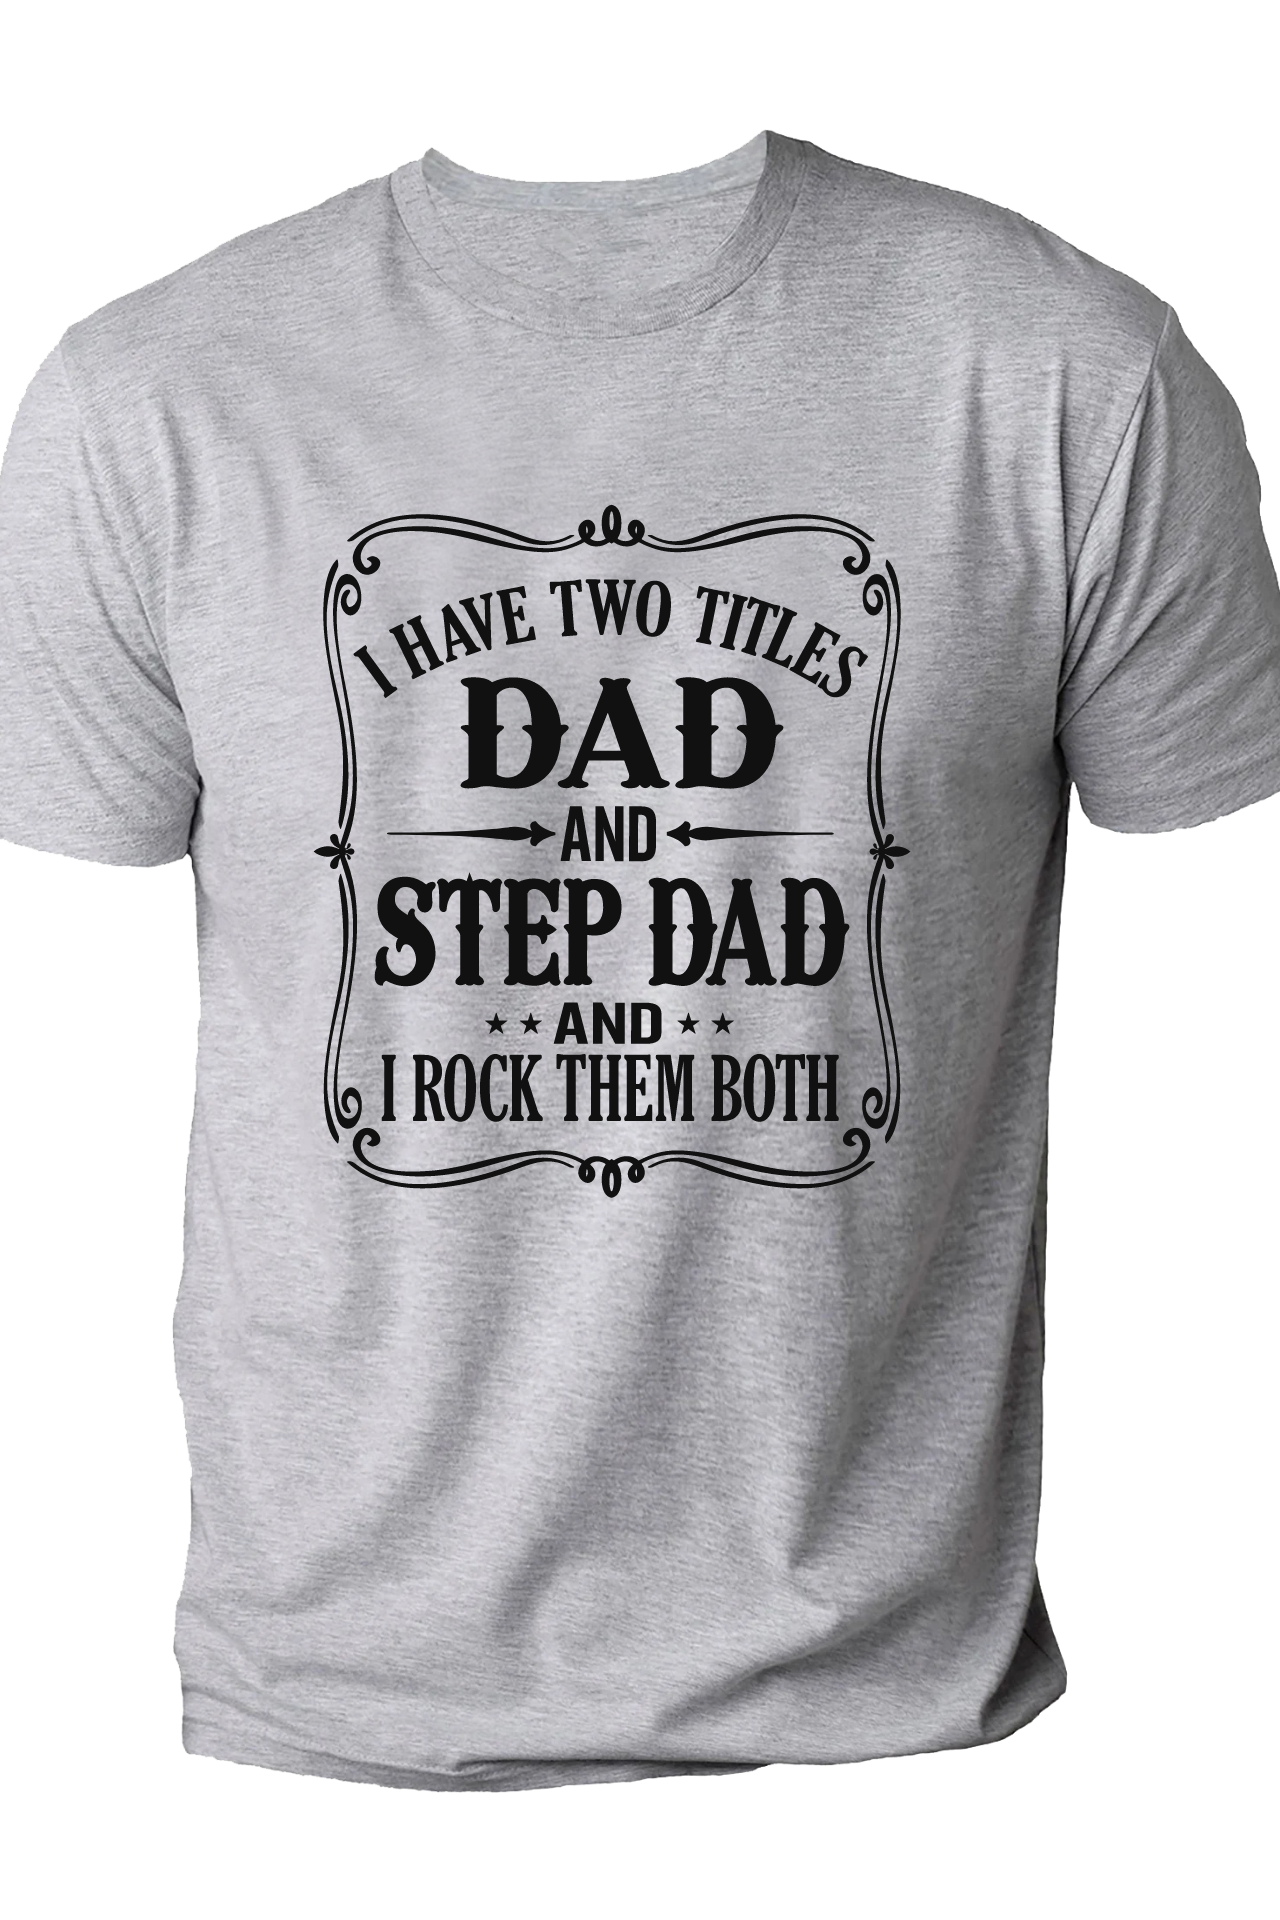 I have two titles, dad and stepdad and I rock them both tshirt